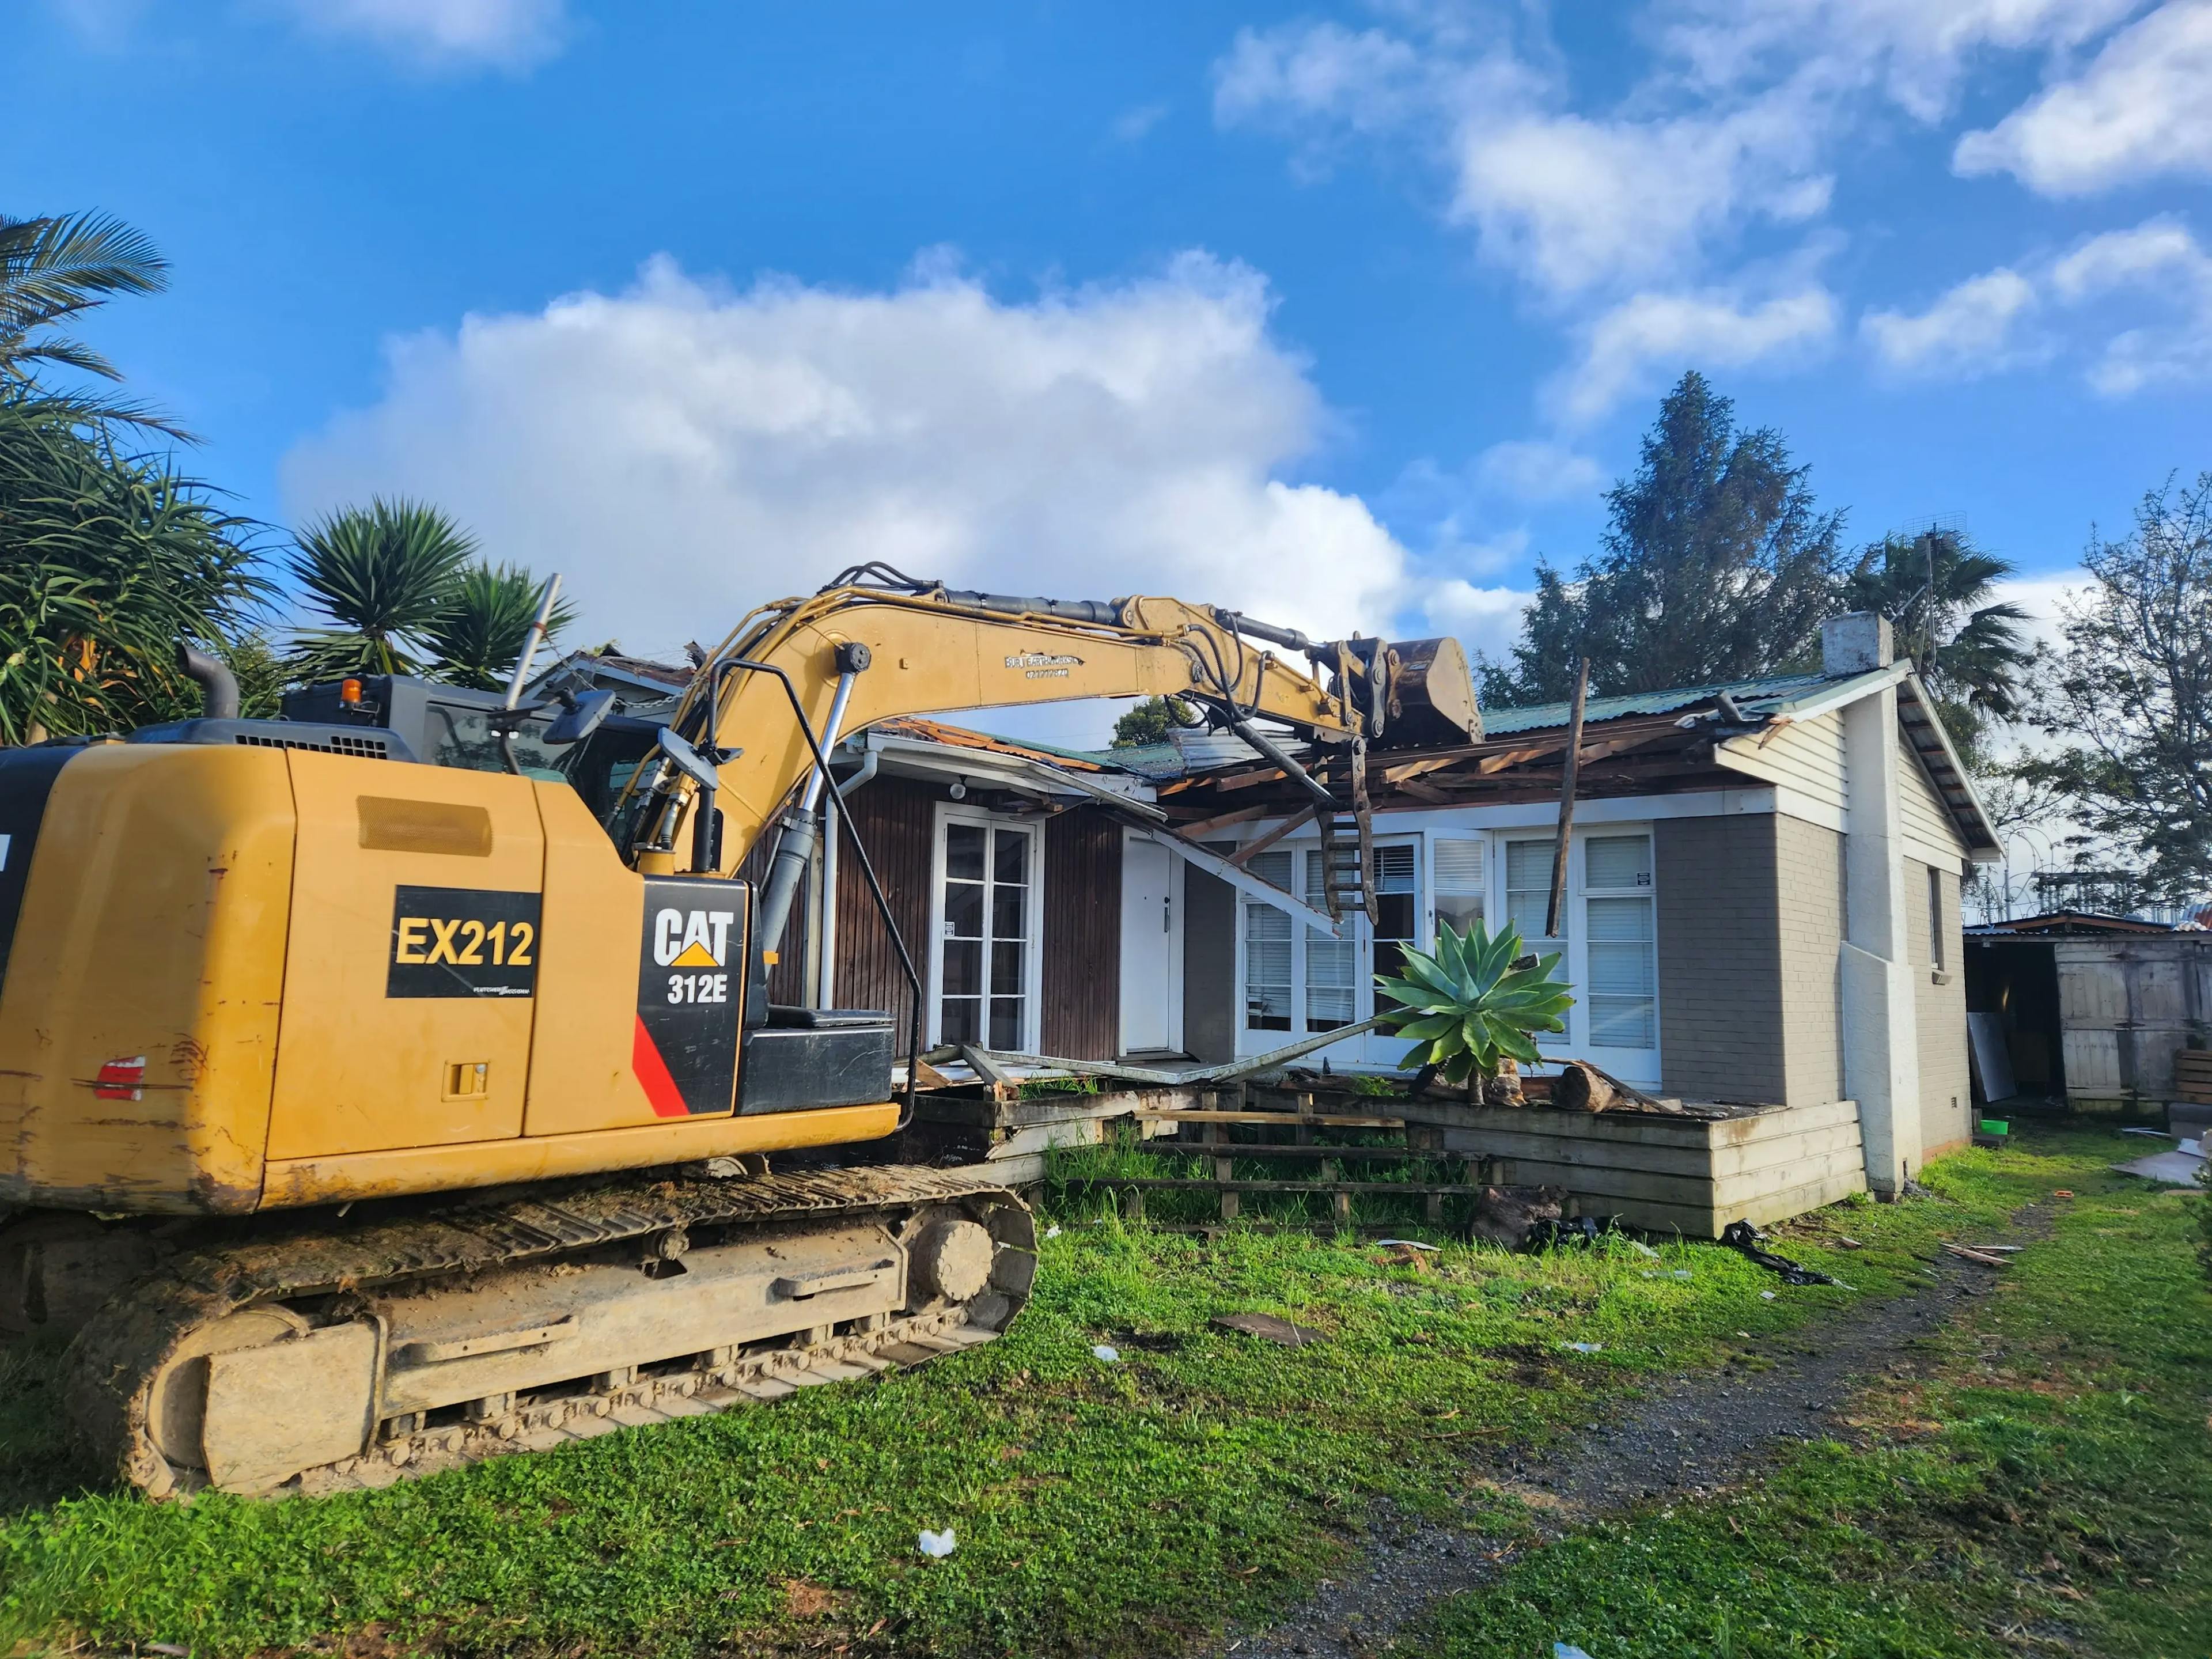 Experienced demolition experts with 23+ years of quality service. Old buildings or offices, we've got you covered. Call today!